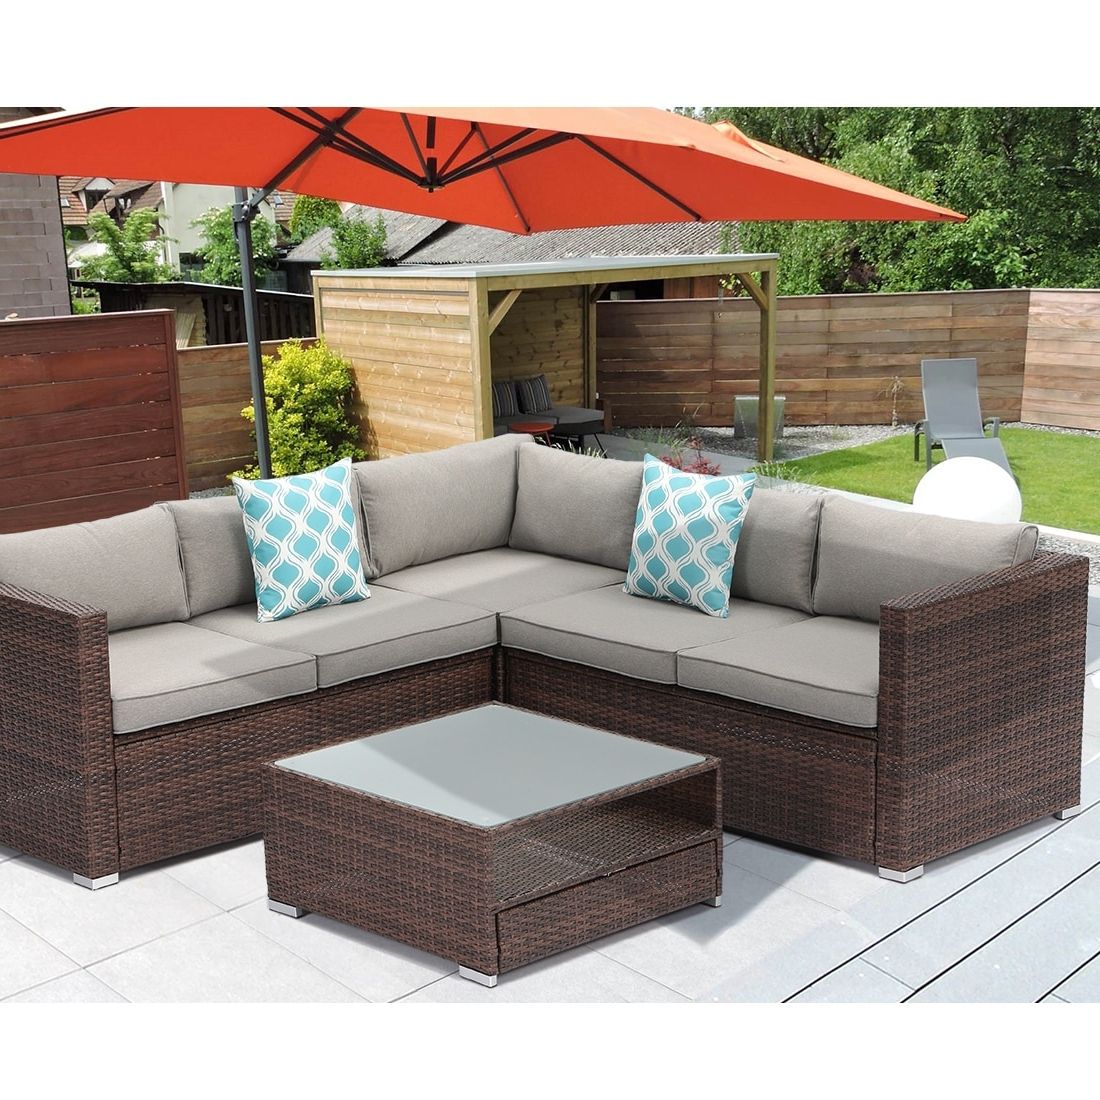 Cosiest Wicker Outdoor Sectional Set With Coffee Table & Cover – On Sale –  – 31483098 Inside Well Known Outdoor Rattan Sectional Sofas With Coffee Table (View 7 of 15)